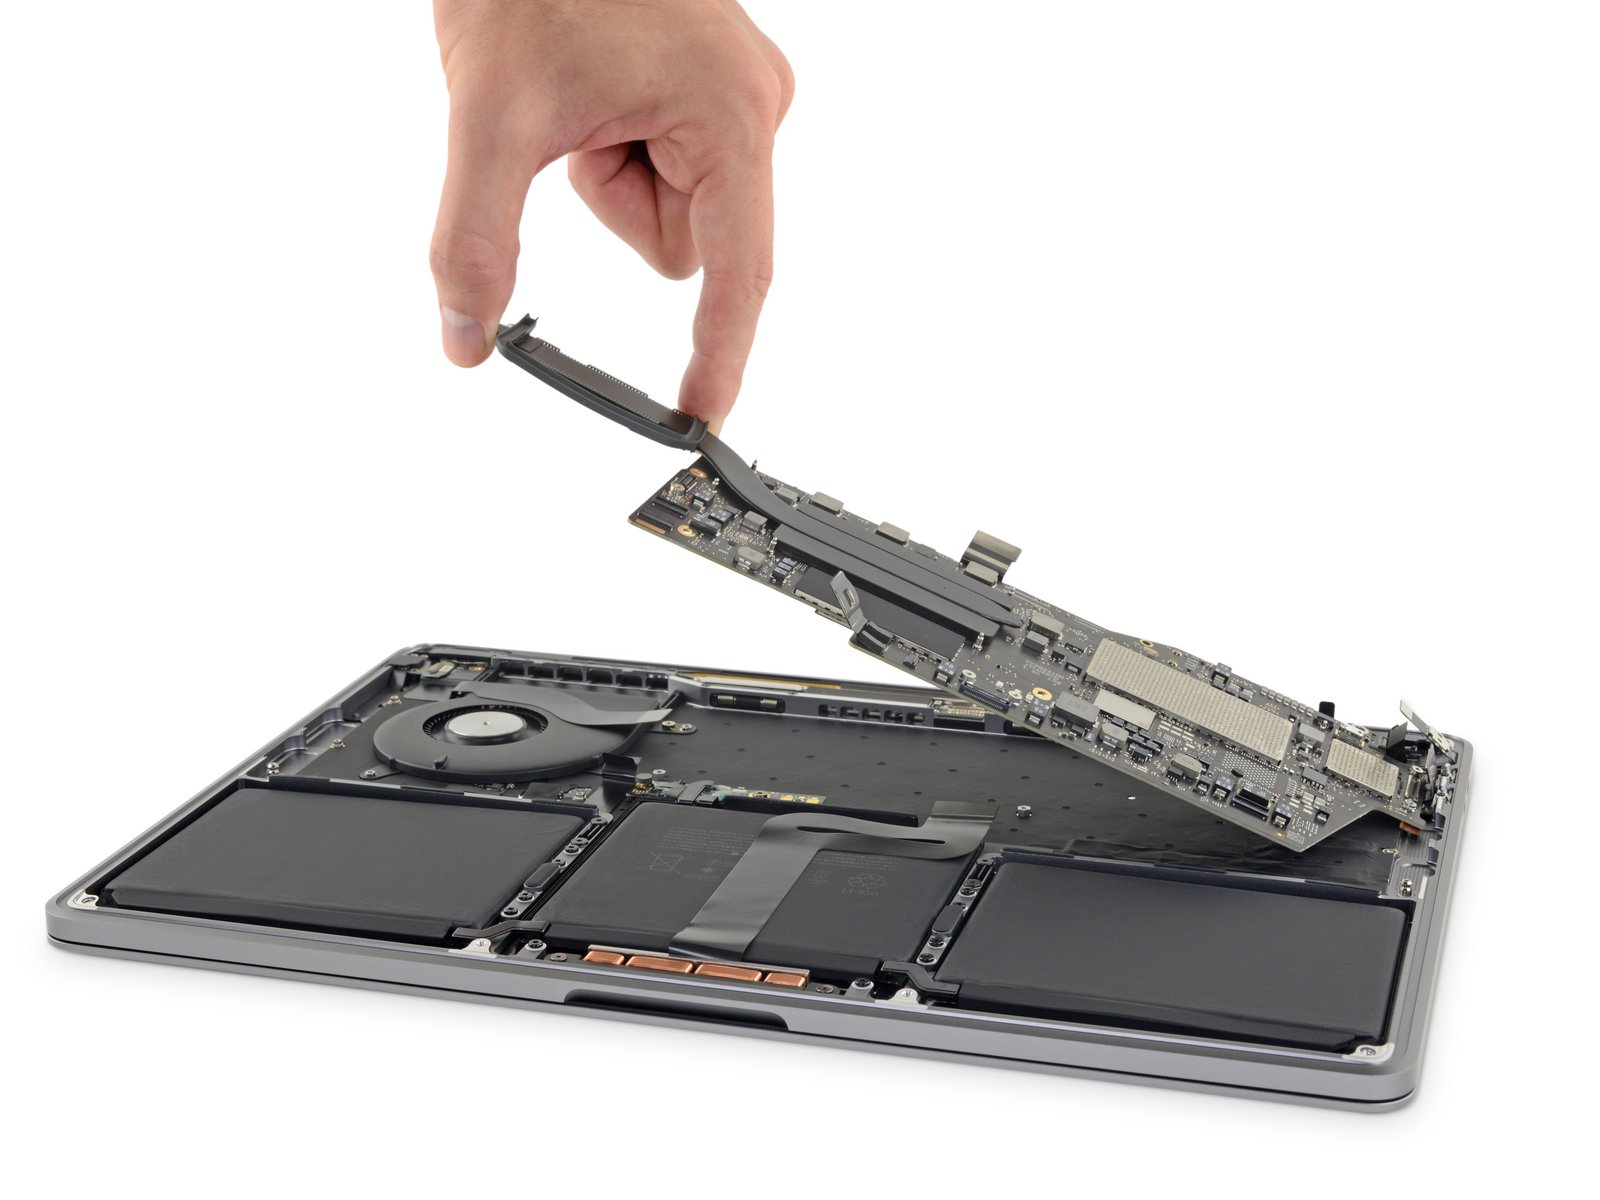 iFixit Teardown of 2019 Base 13-inch MacBook Pro Model Reveals Larger Soldered-Down and Updated Keyboard Materials